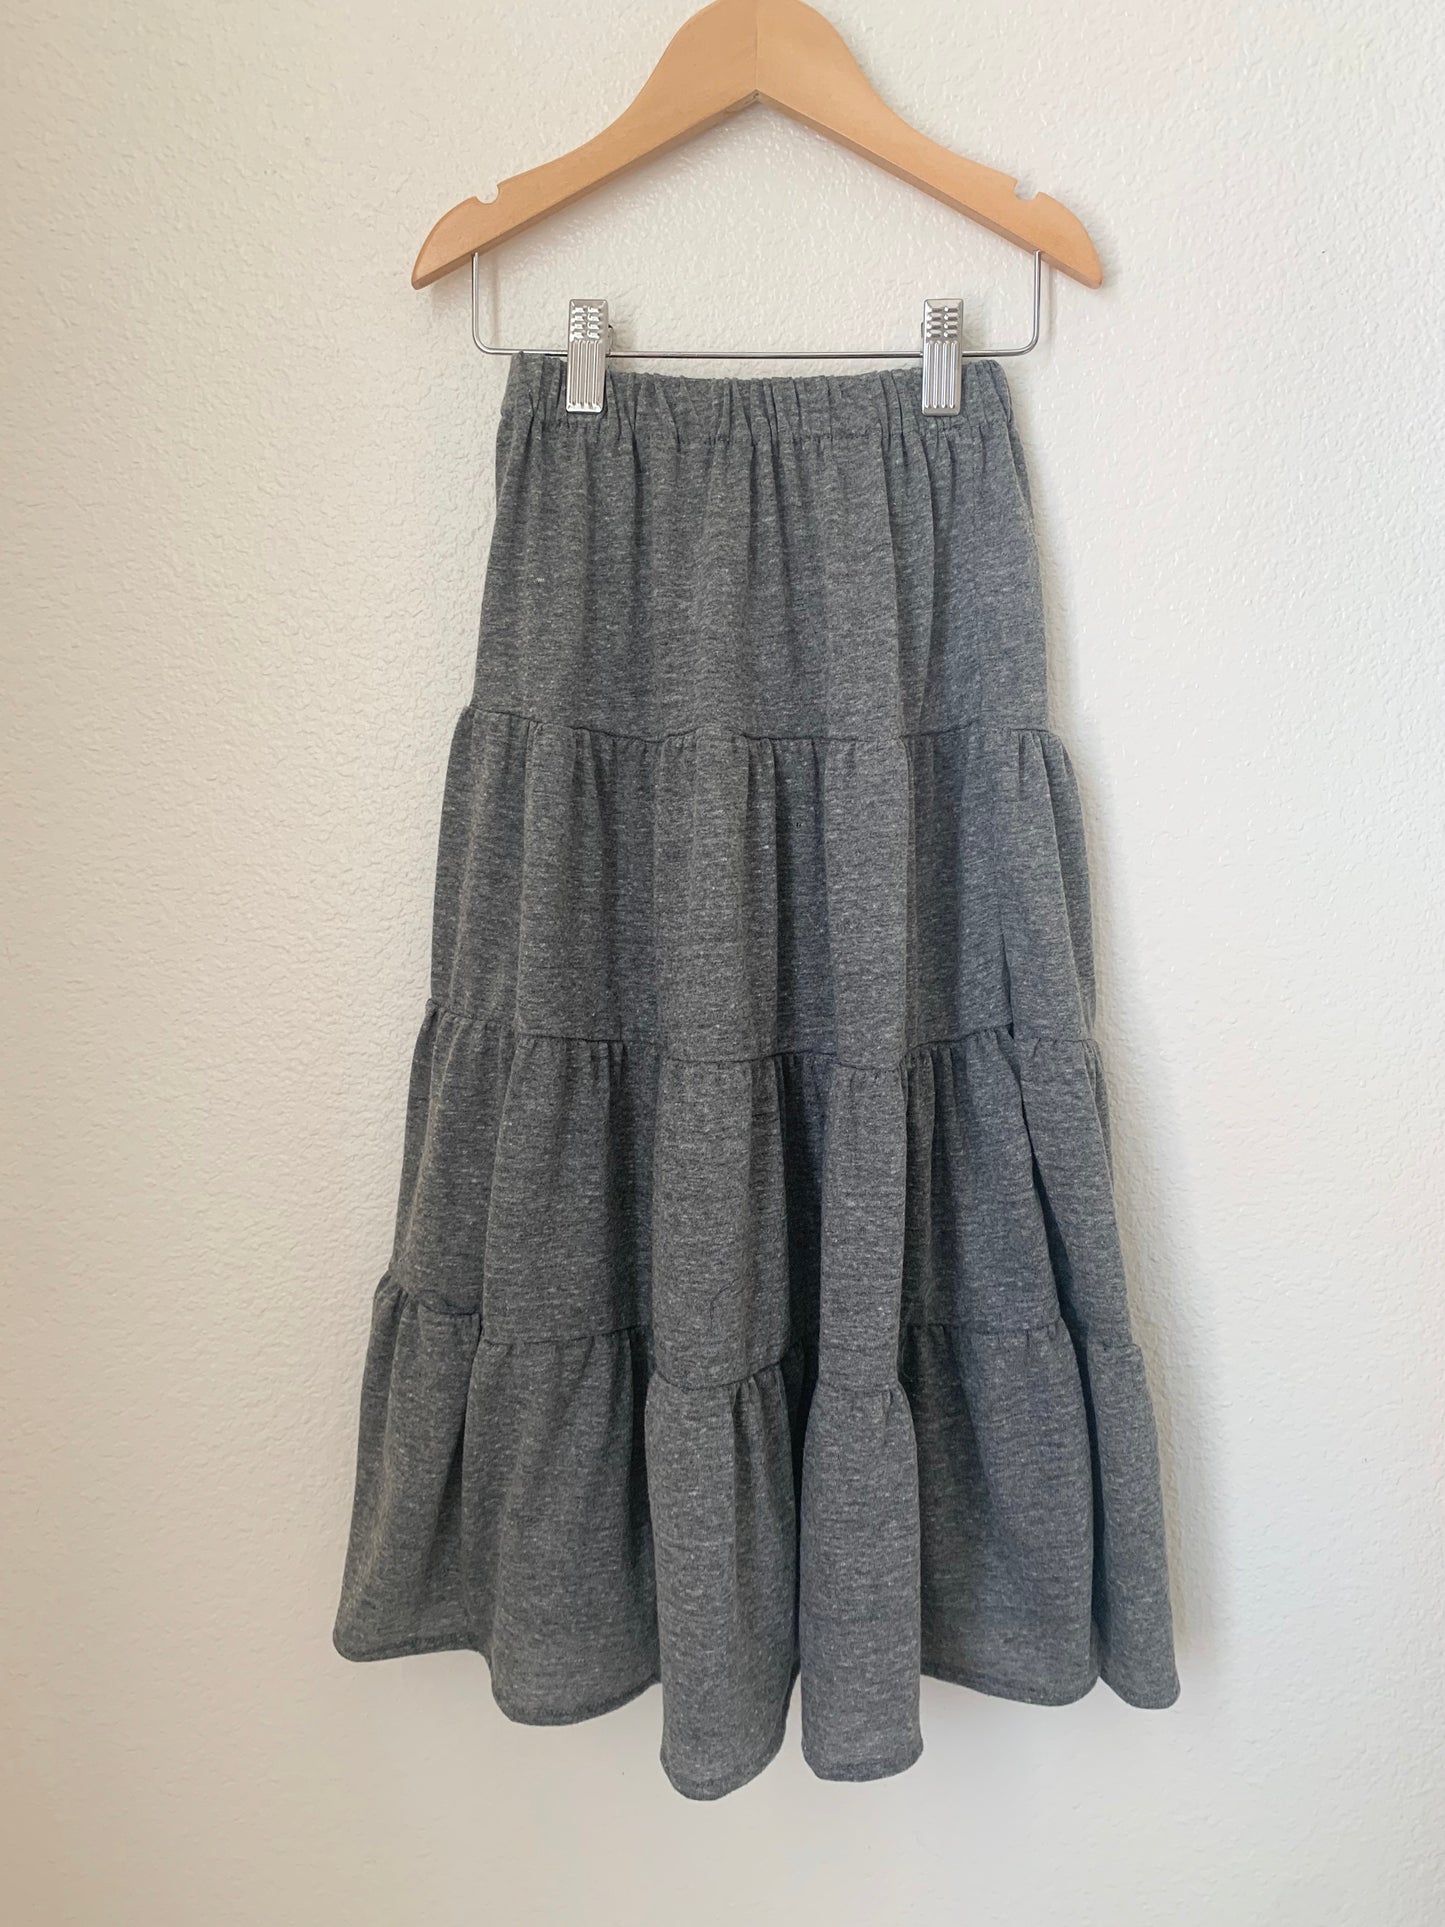 tiered maxi skirt in grey